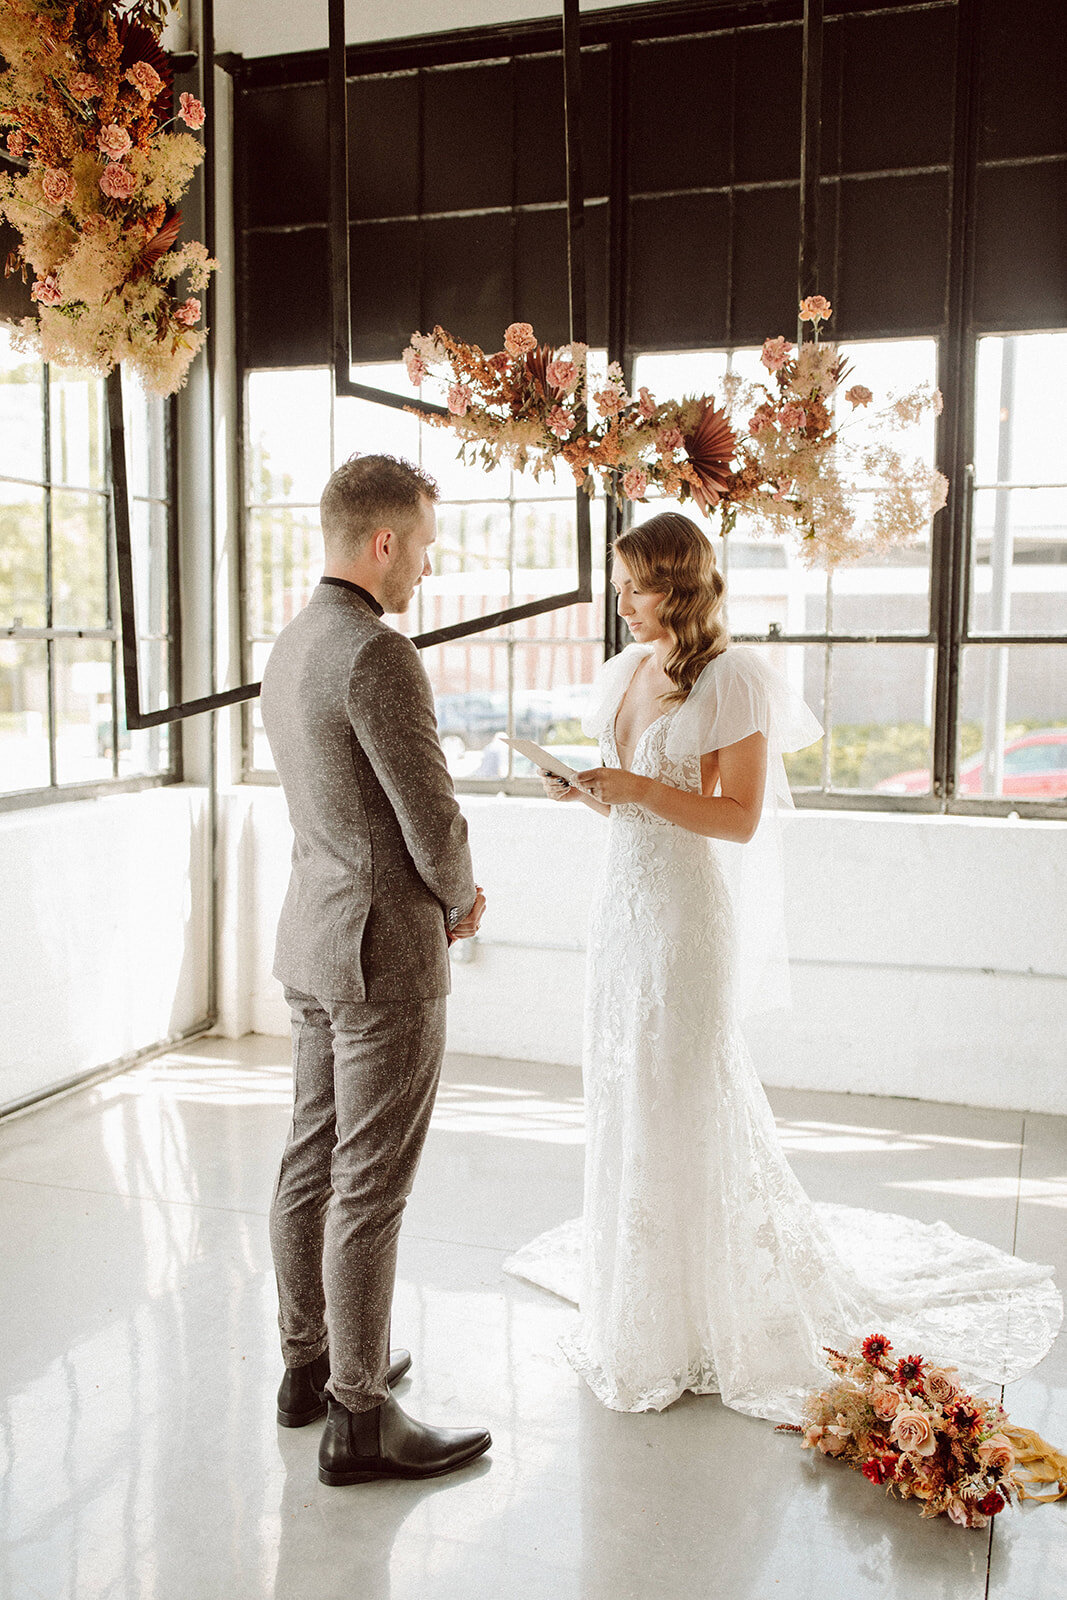 Bride and groom wearing a gray suit and white wedding gown stand facing each other in light airy room filled with flowers.